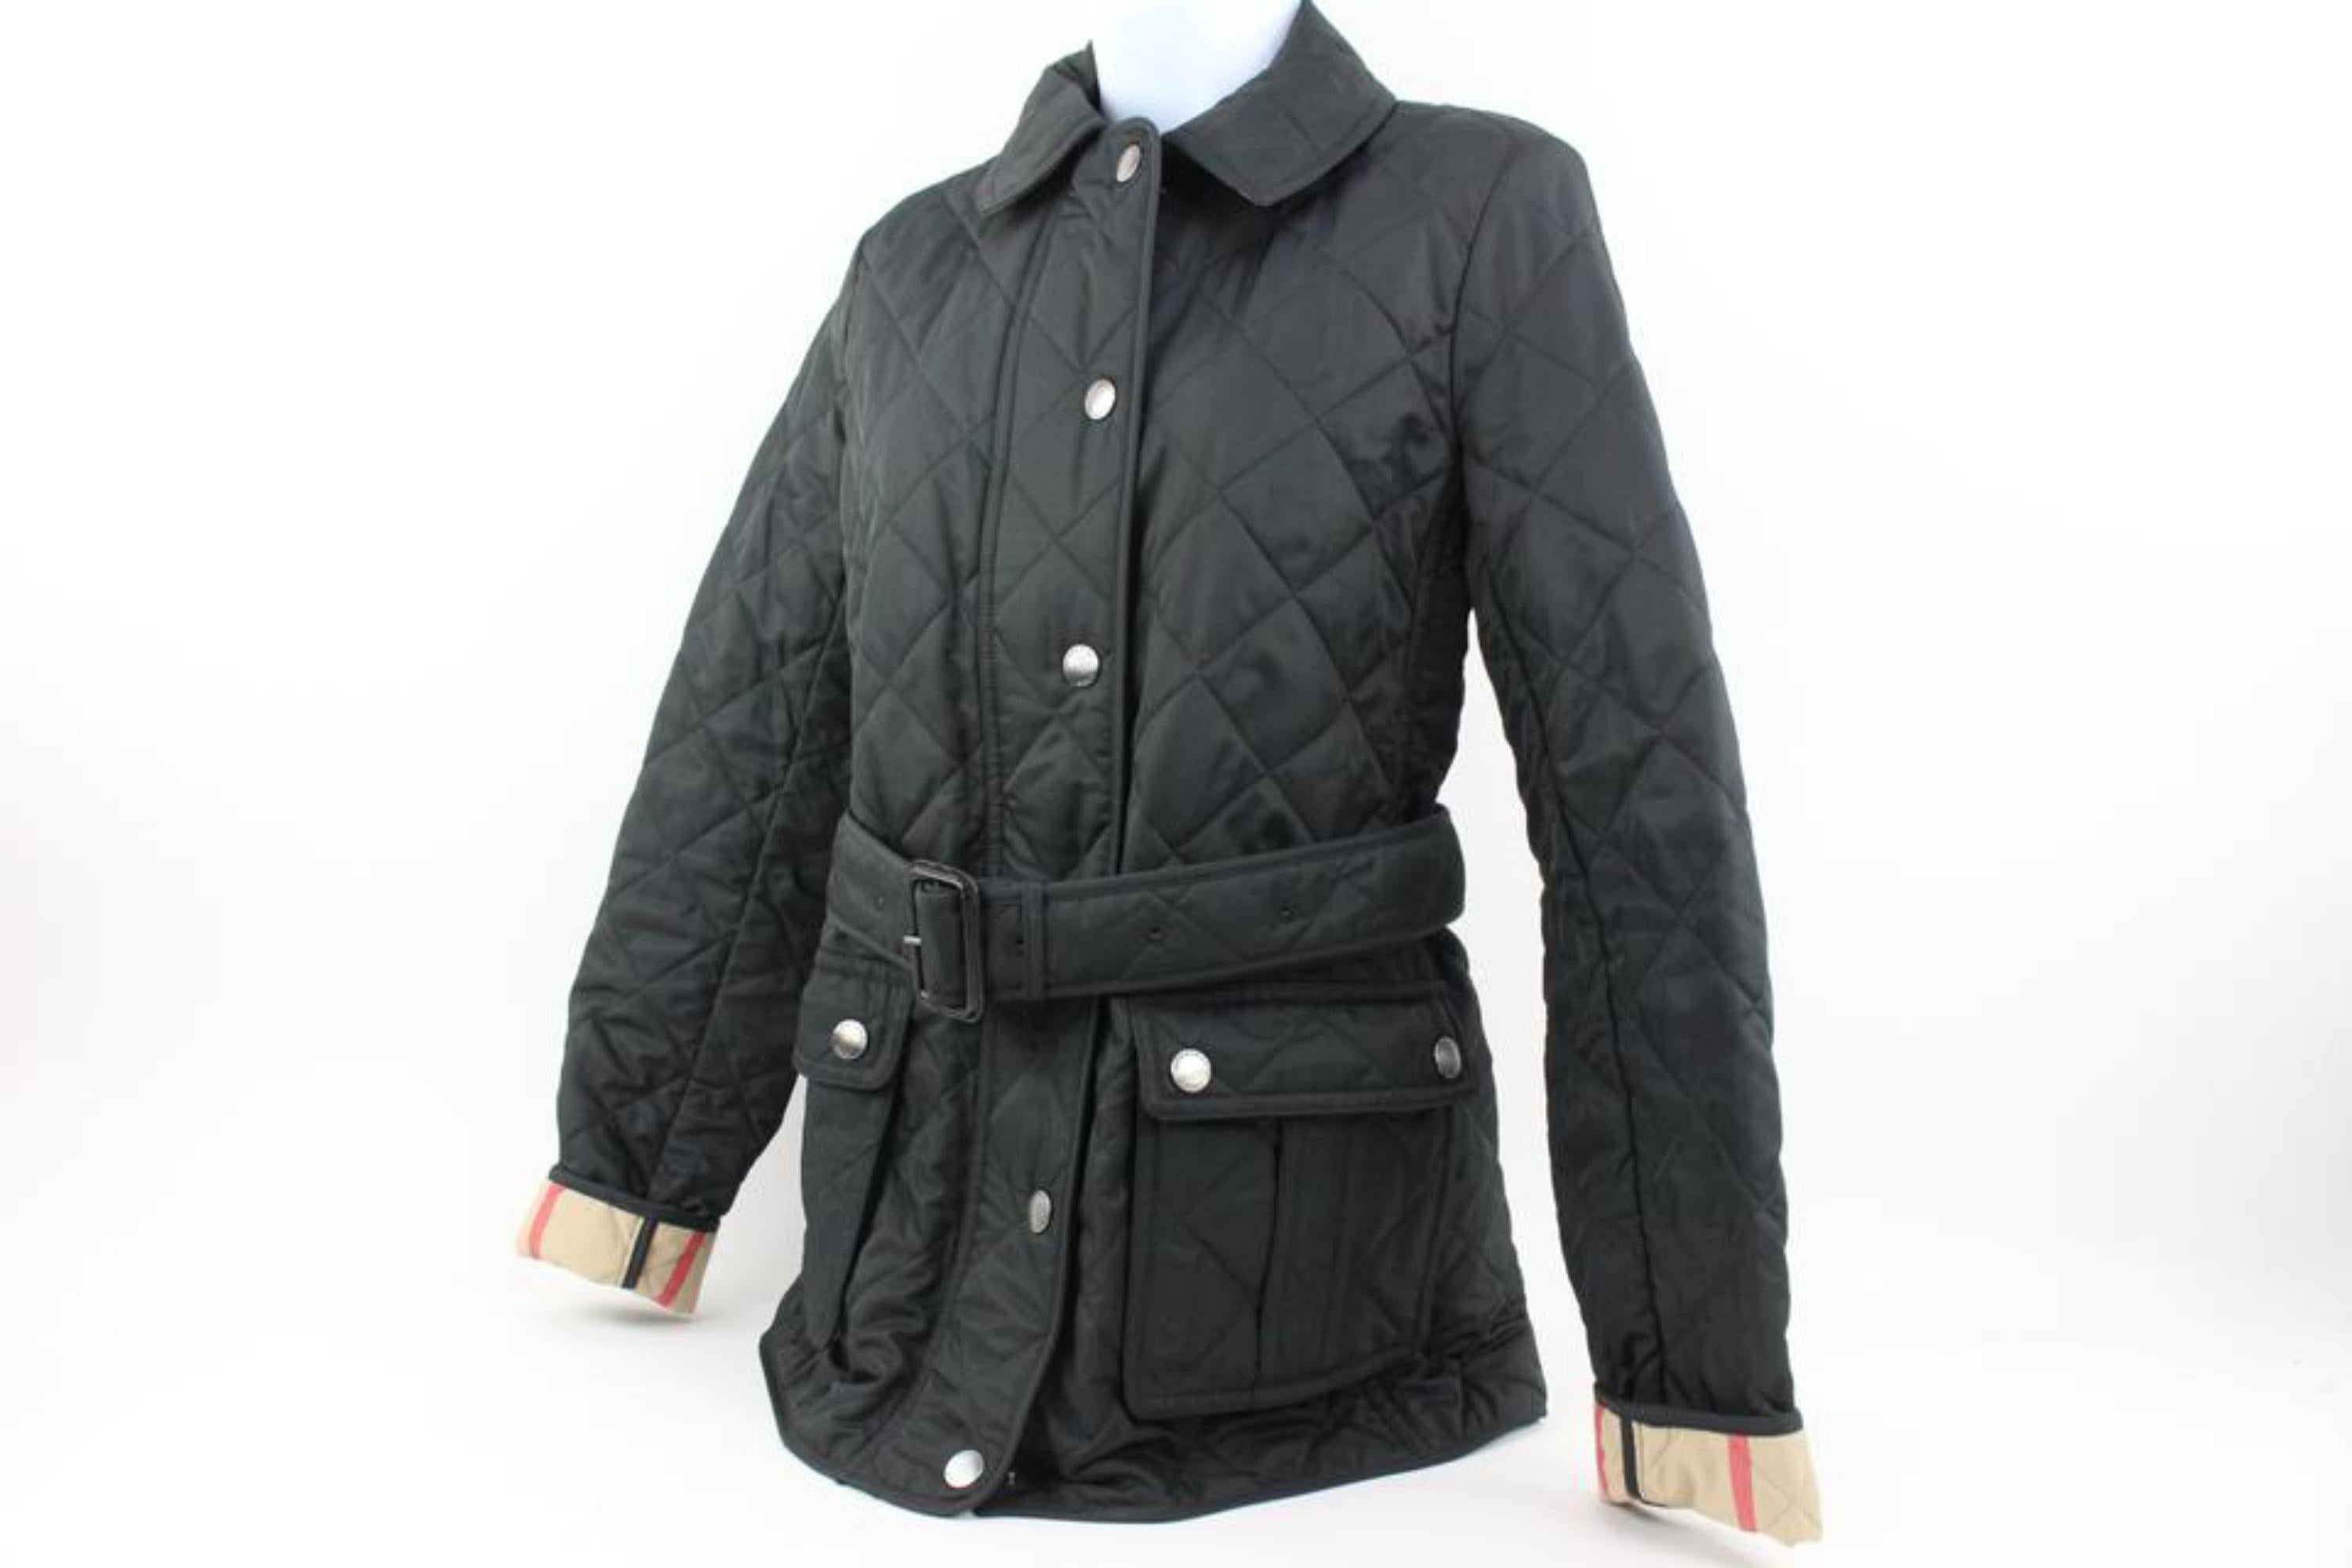 Burberry Women's Small Black Quilted Nova Check Belted Jacket 120b33
Date Code/Serial Number: TRMCTTEK120IST
Made In: Turkey
Measurements: Length:  18